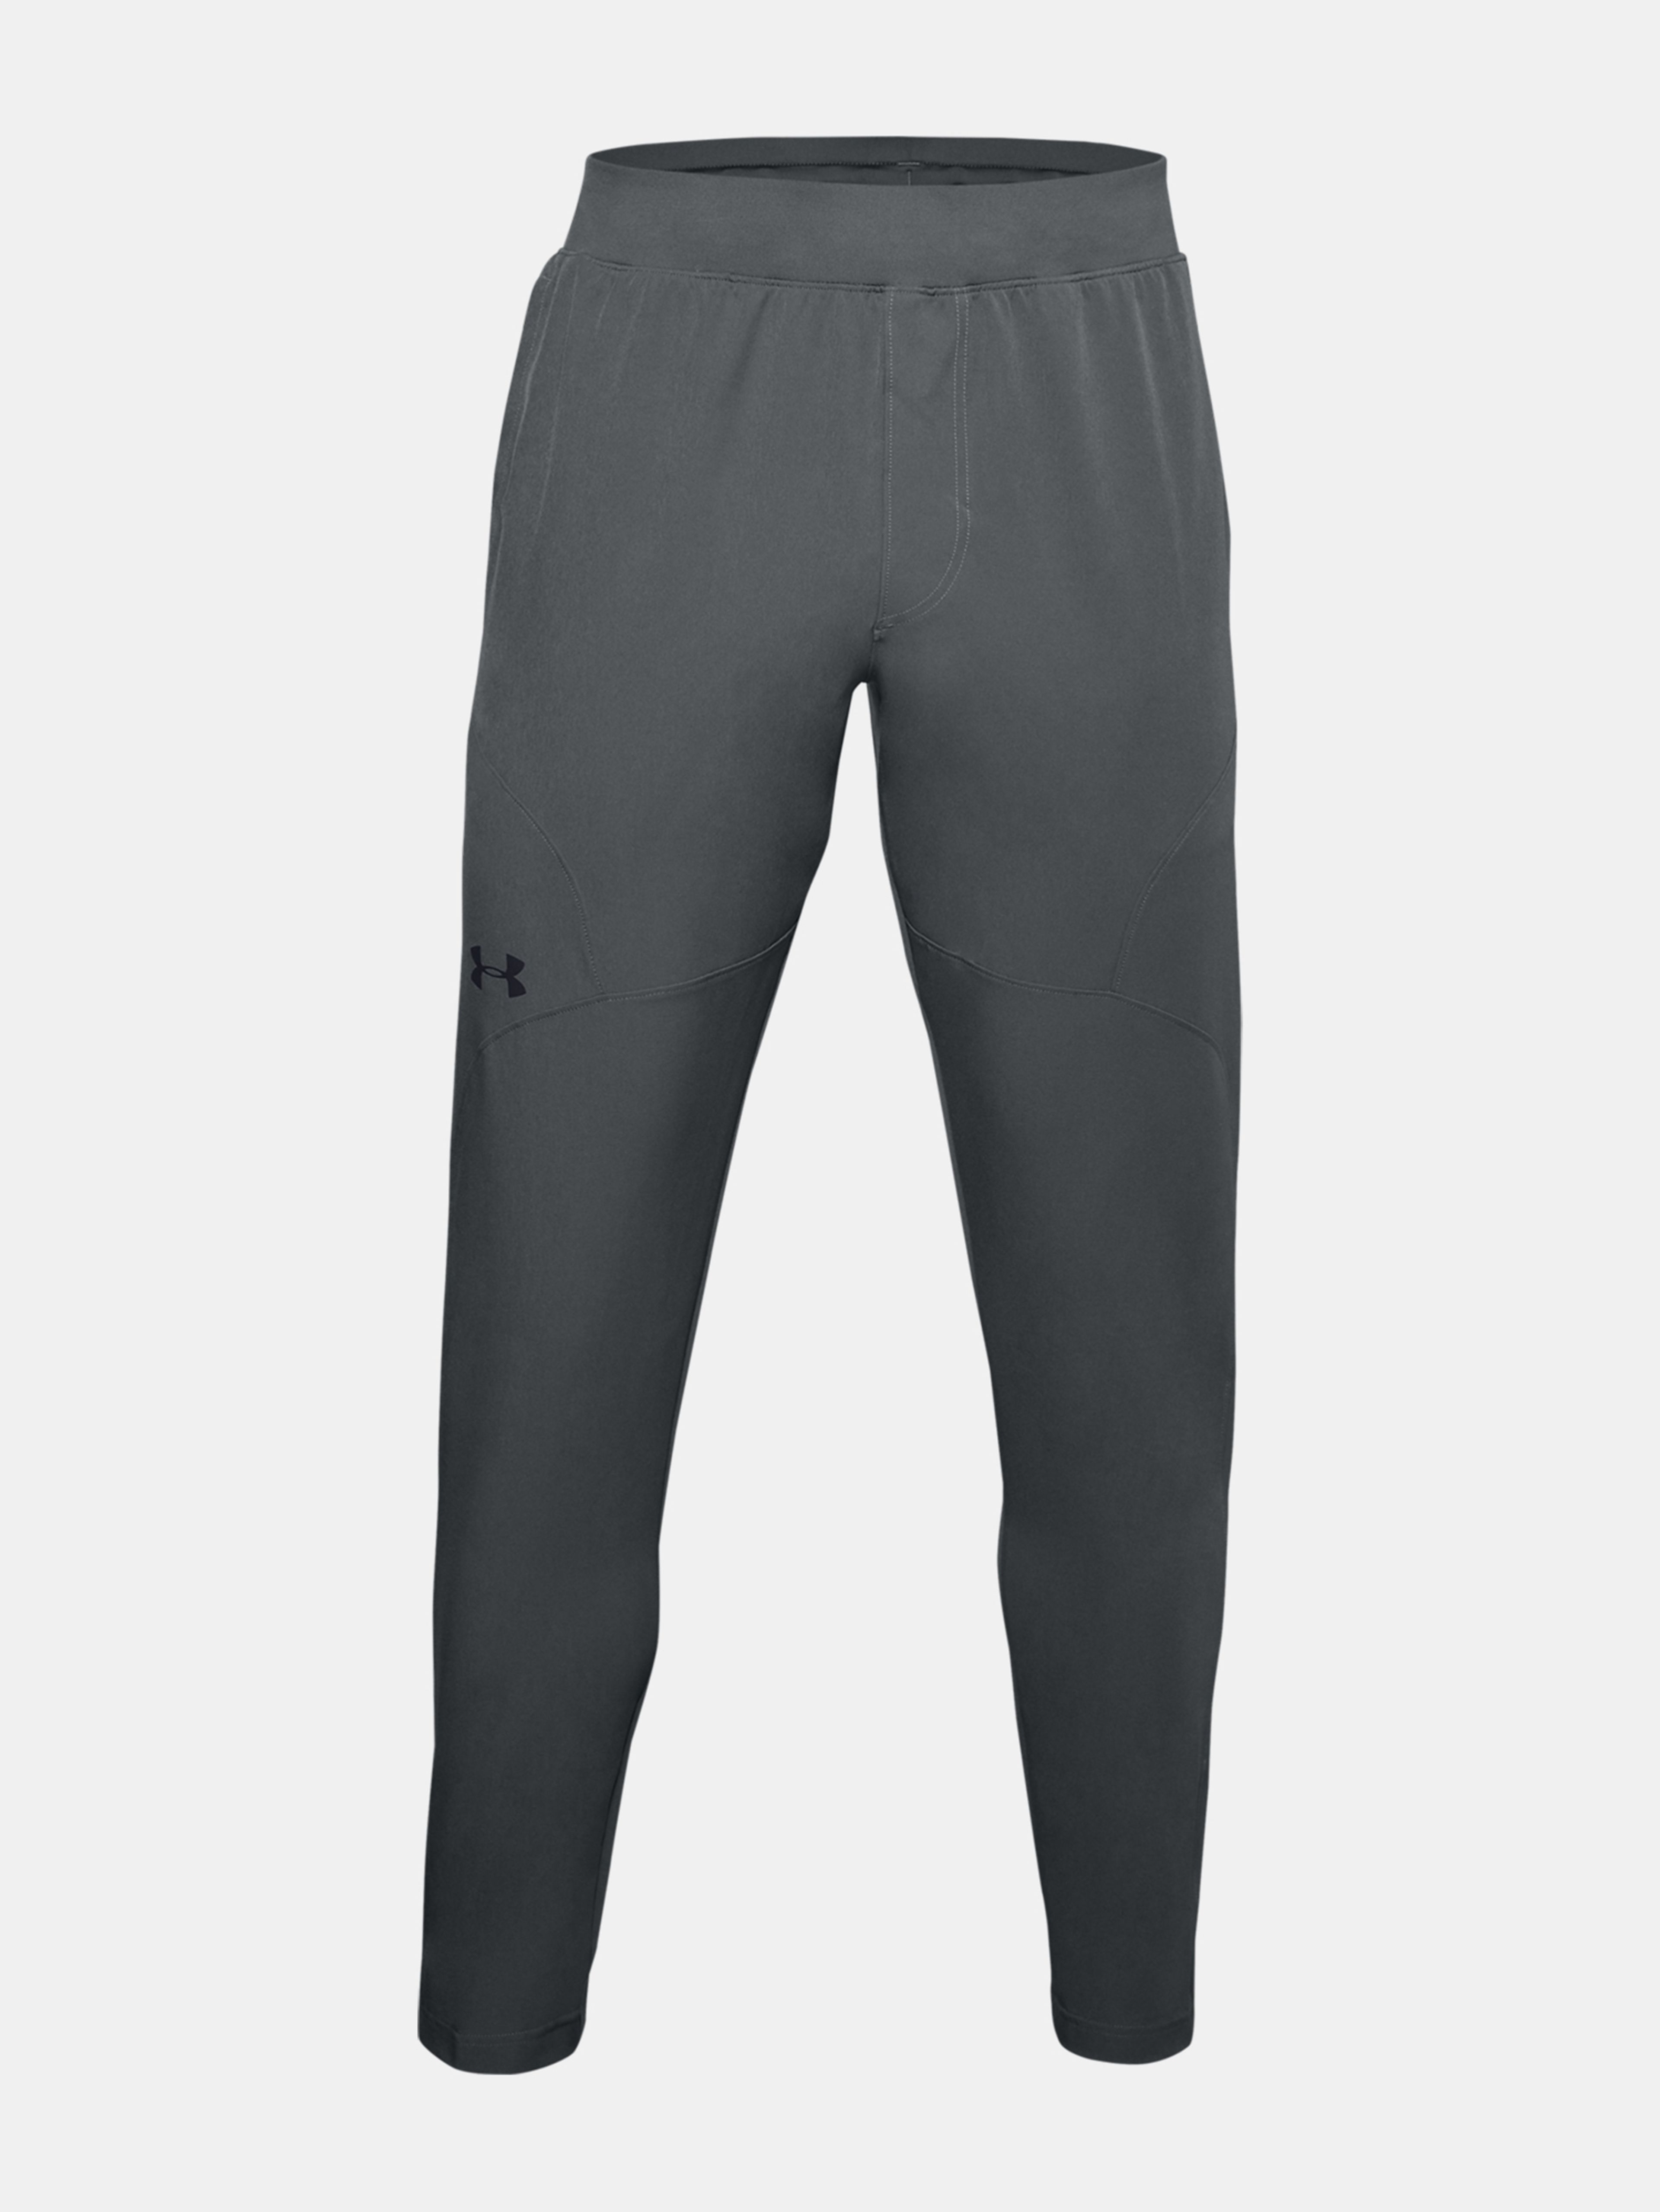 Nohavice Under Armour UNSTOPPABLE TAPERED Storm PANTS-GRY